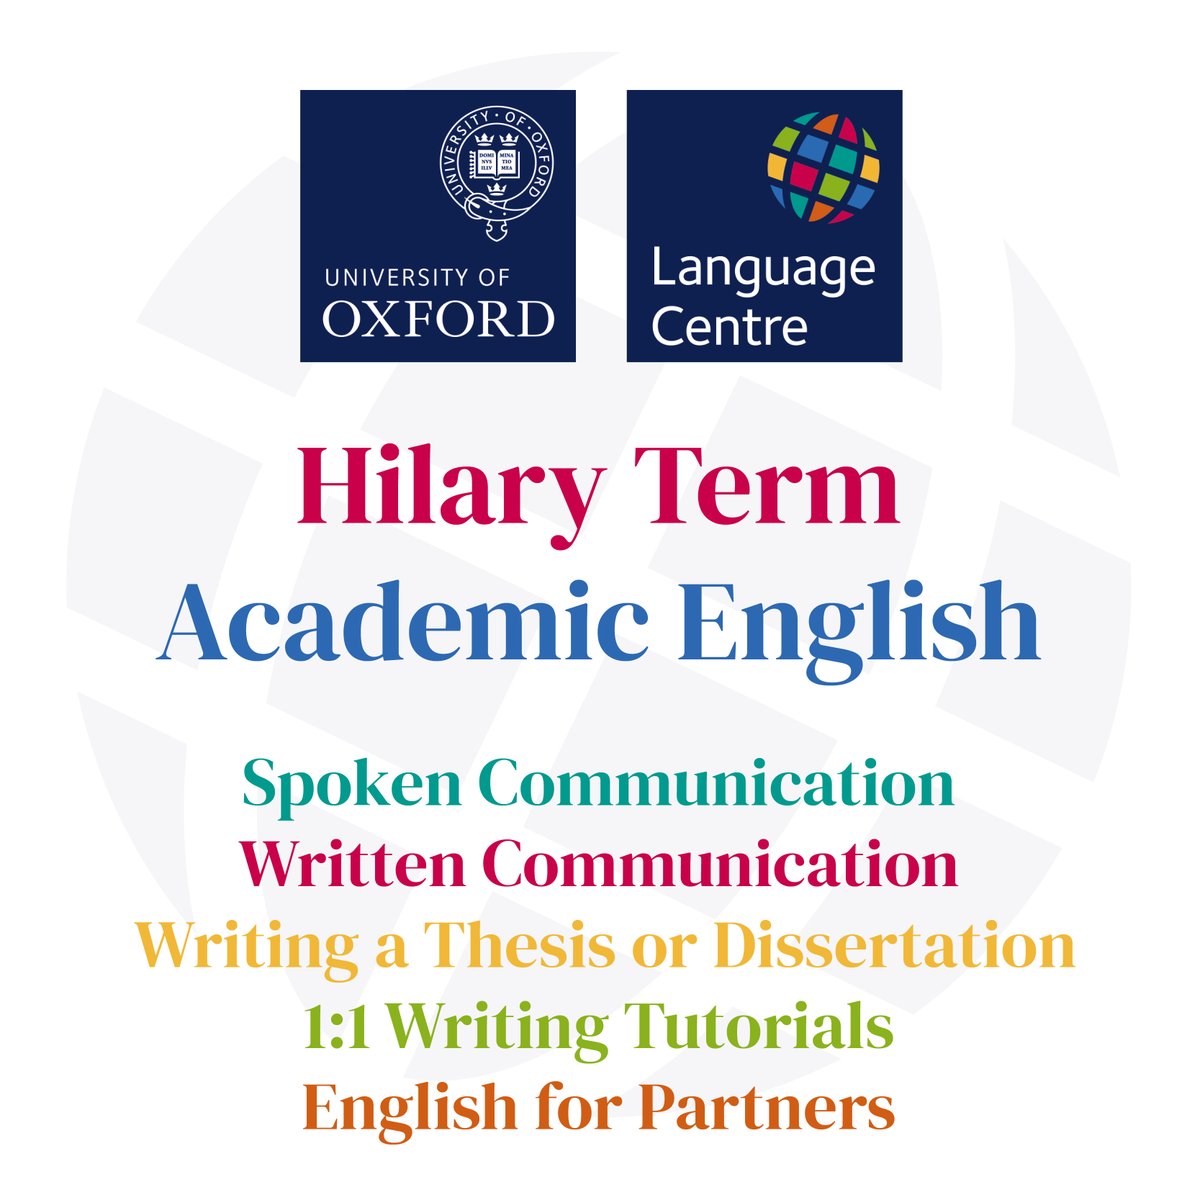 Book your place on an Academic English course by noon on 17 Jan 🗣️Spoken Communication & Pronunciation 🖋️Introduction to Academic Writing & Language 🖋️Key Issues in Academic Written Communication 📚Writing a Thesis or Dissertation 👫English for Partners lang.ox.ac.uk/academic-engli…